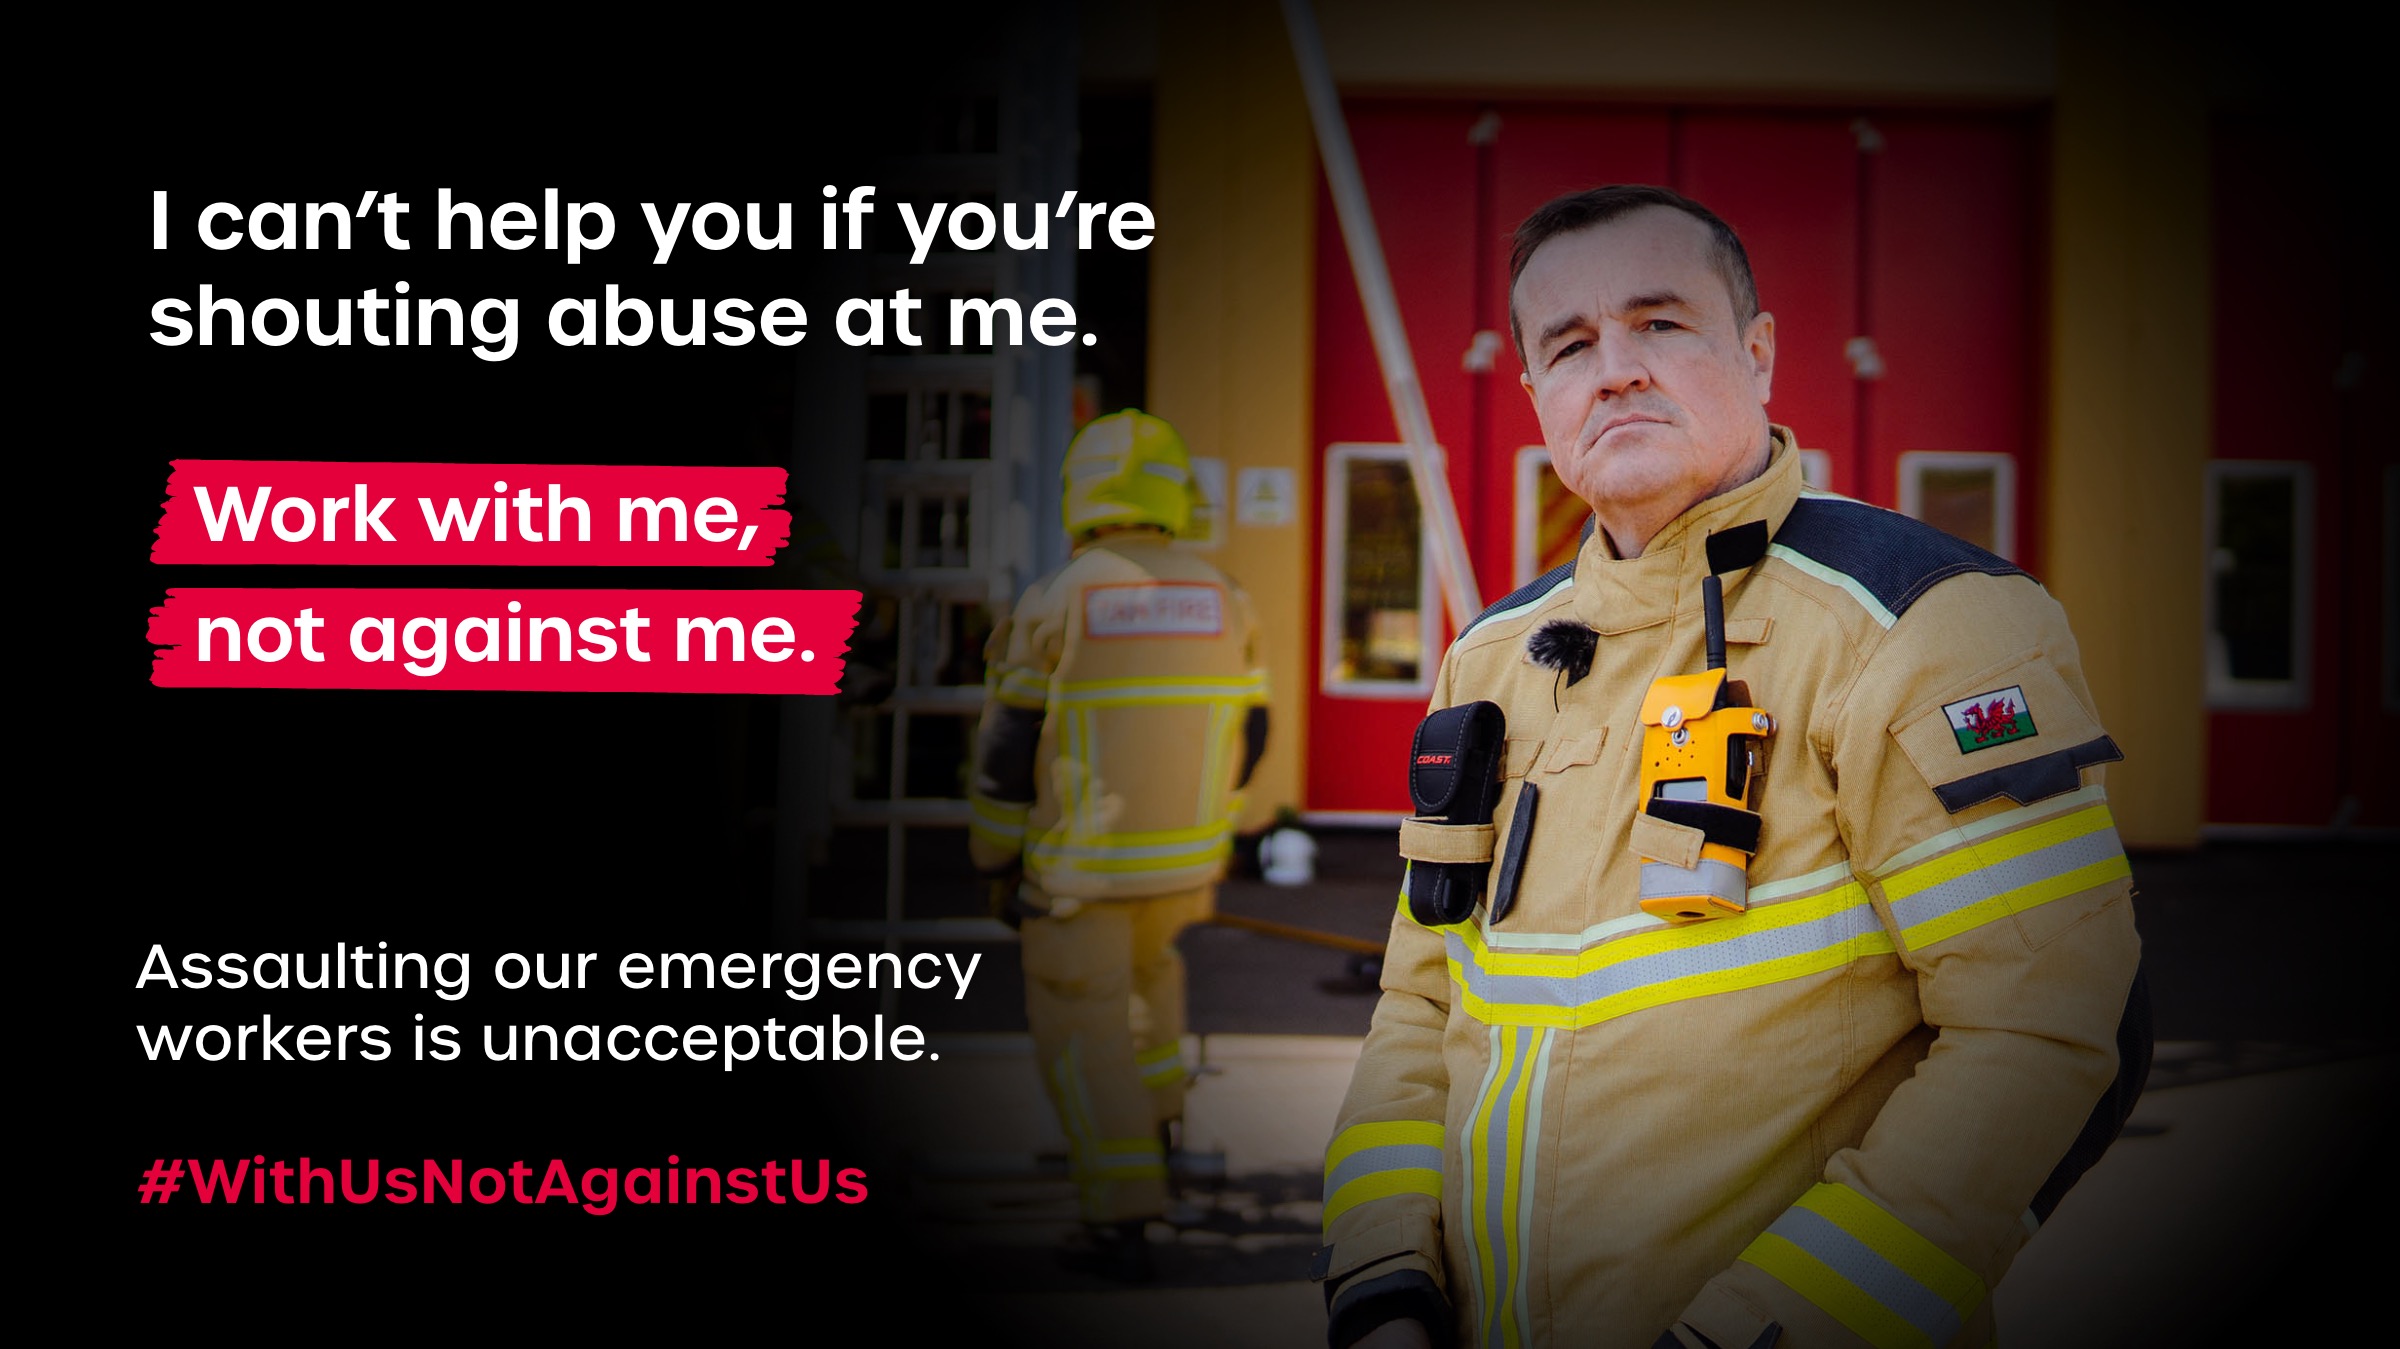 Eight assaults a day on emergency workers – work with us, not against us is the Christmas plea